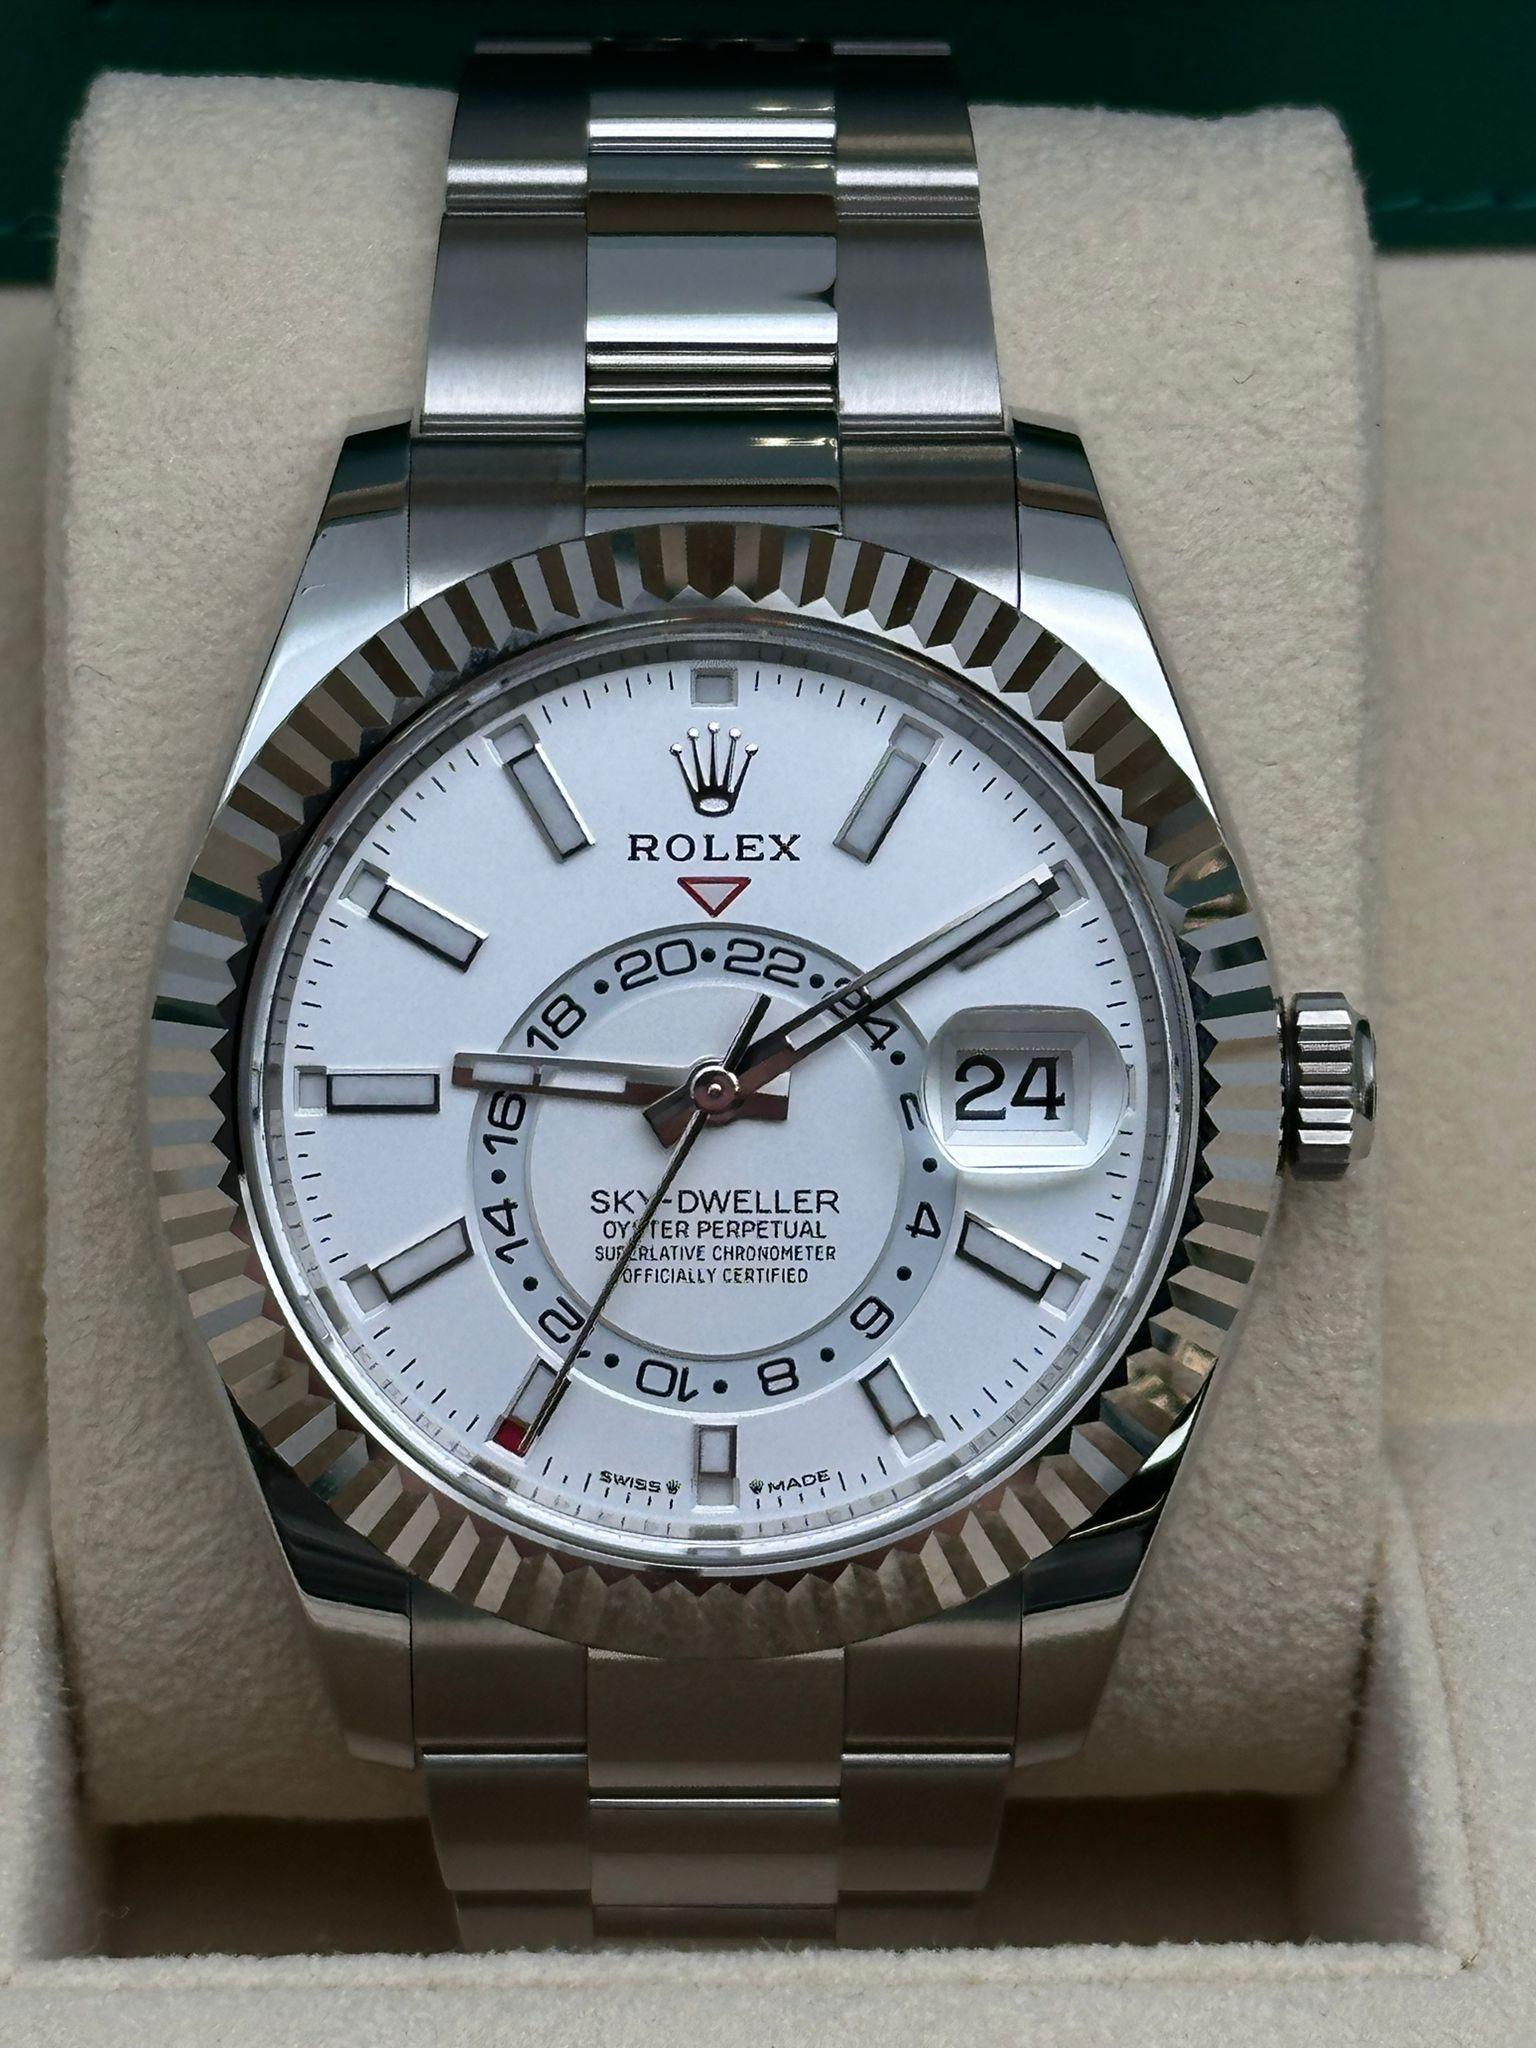 Brand new 2024 card. Comes with the original box and papers.

Brand: Rolex
Country/Region of Manufacture: Switzerland

Watch Type:
Type: Wristwatch
Department: Men
Style: Luxury

Model Information:
Model Number: 336934
Model: Rolex